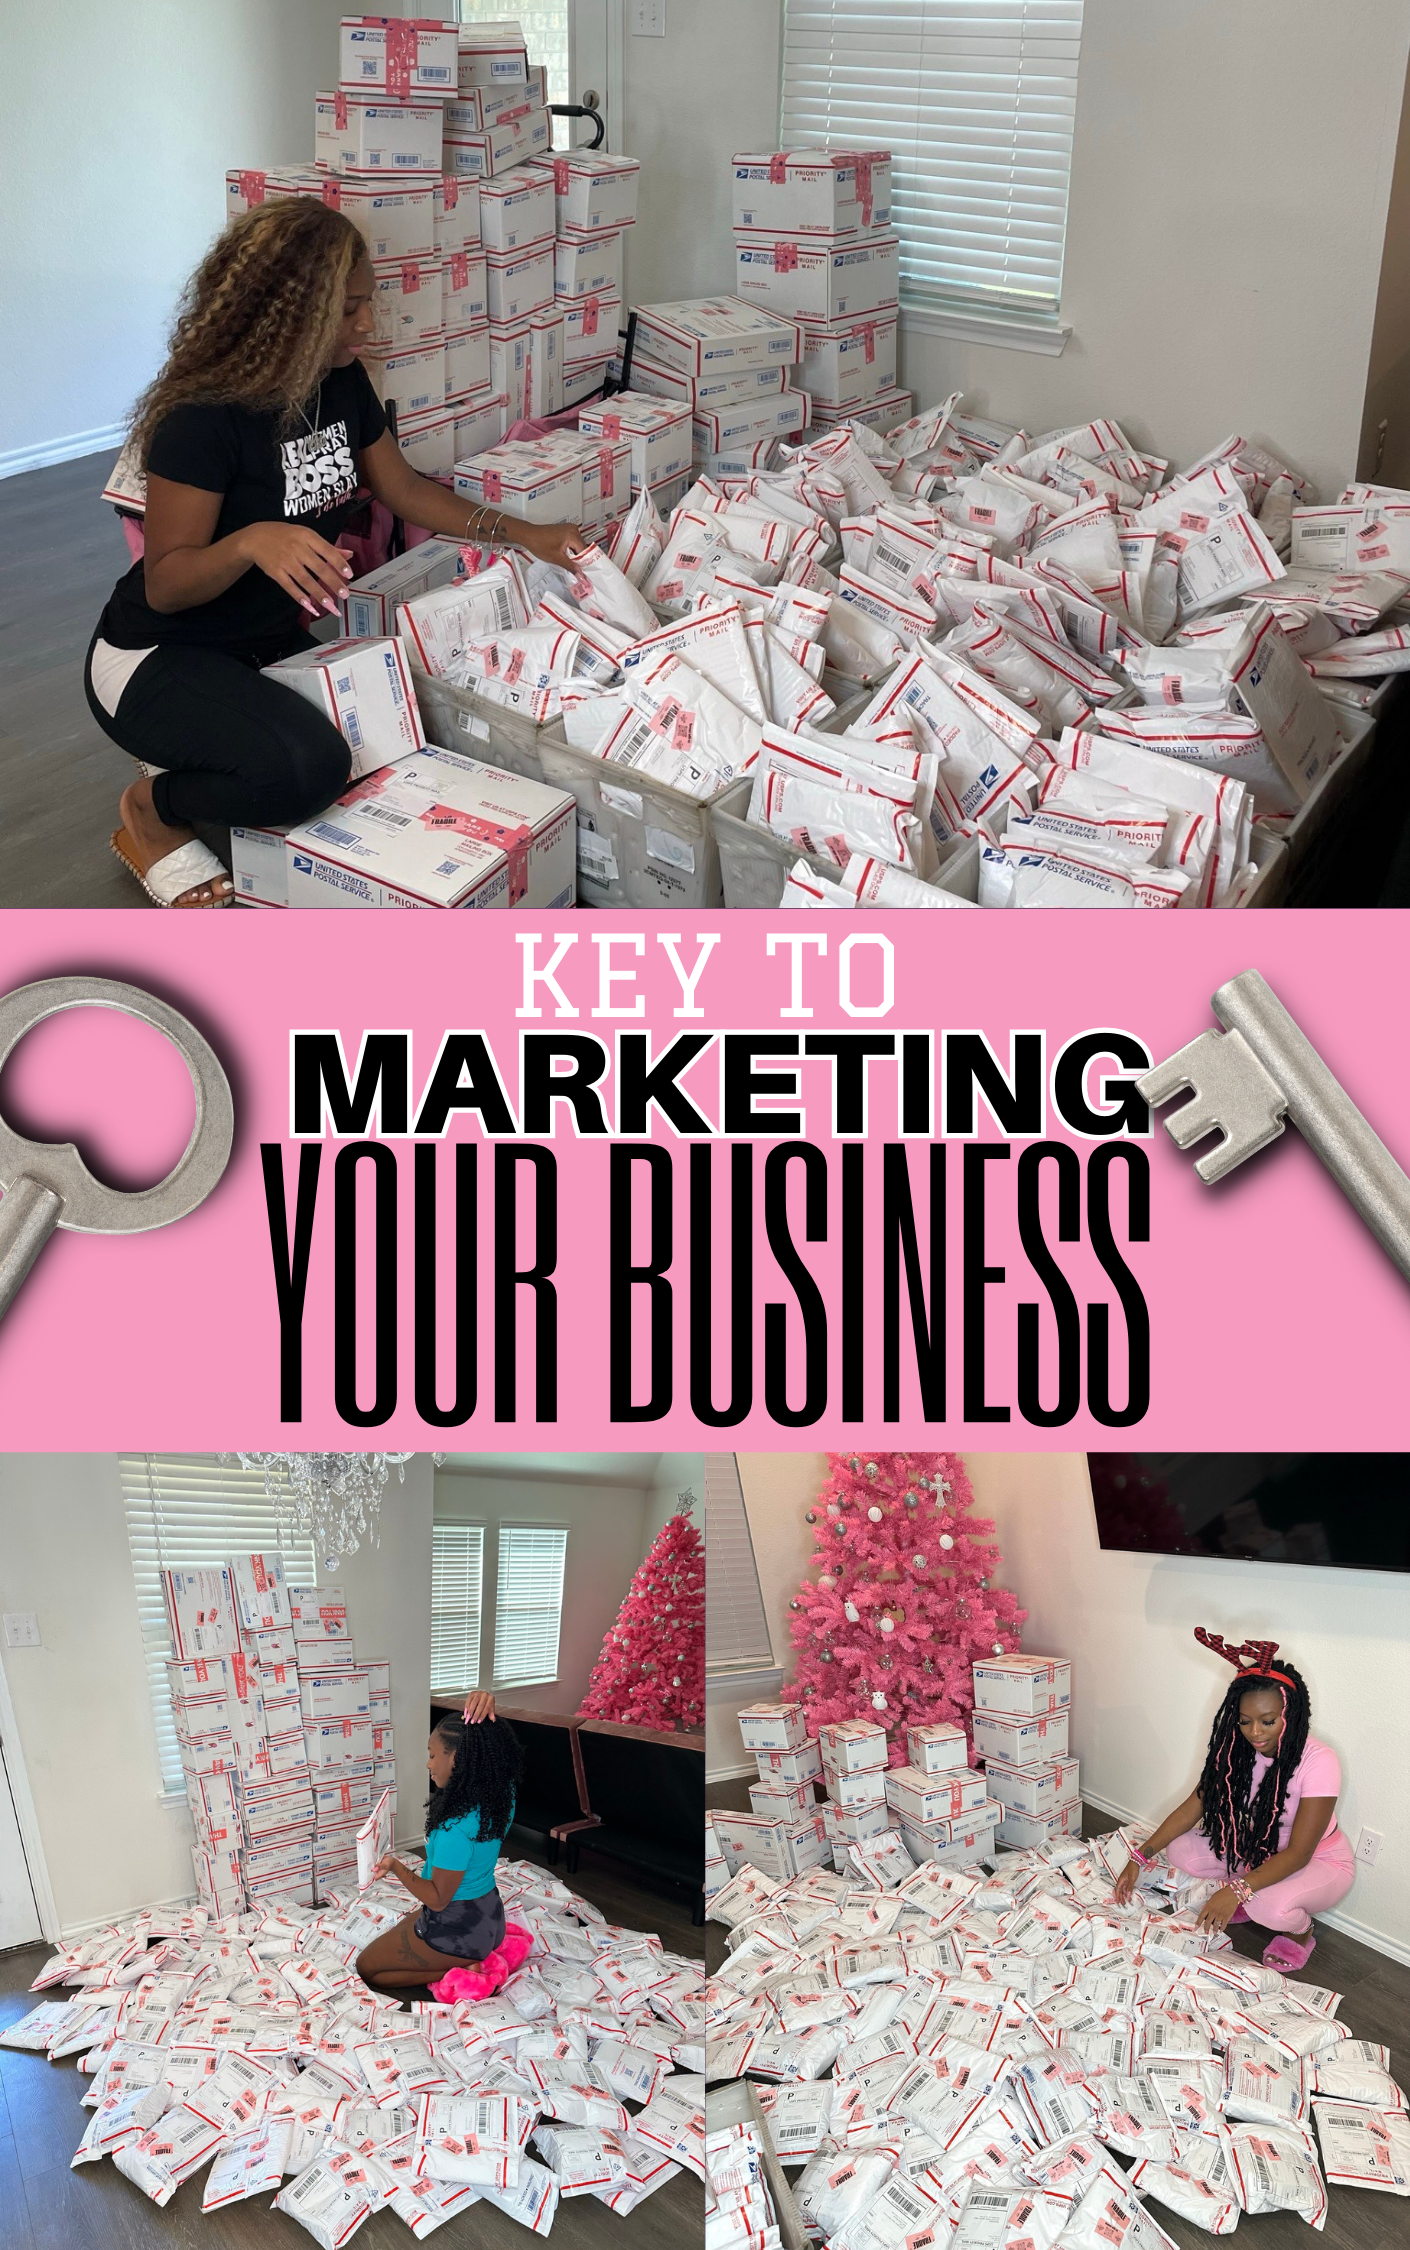 The Key to Marketing Your Business